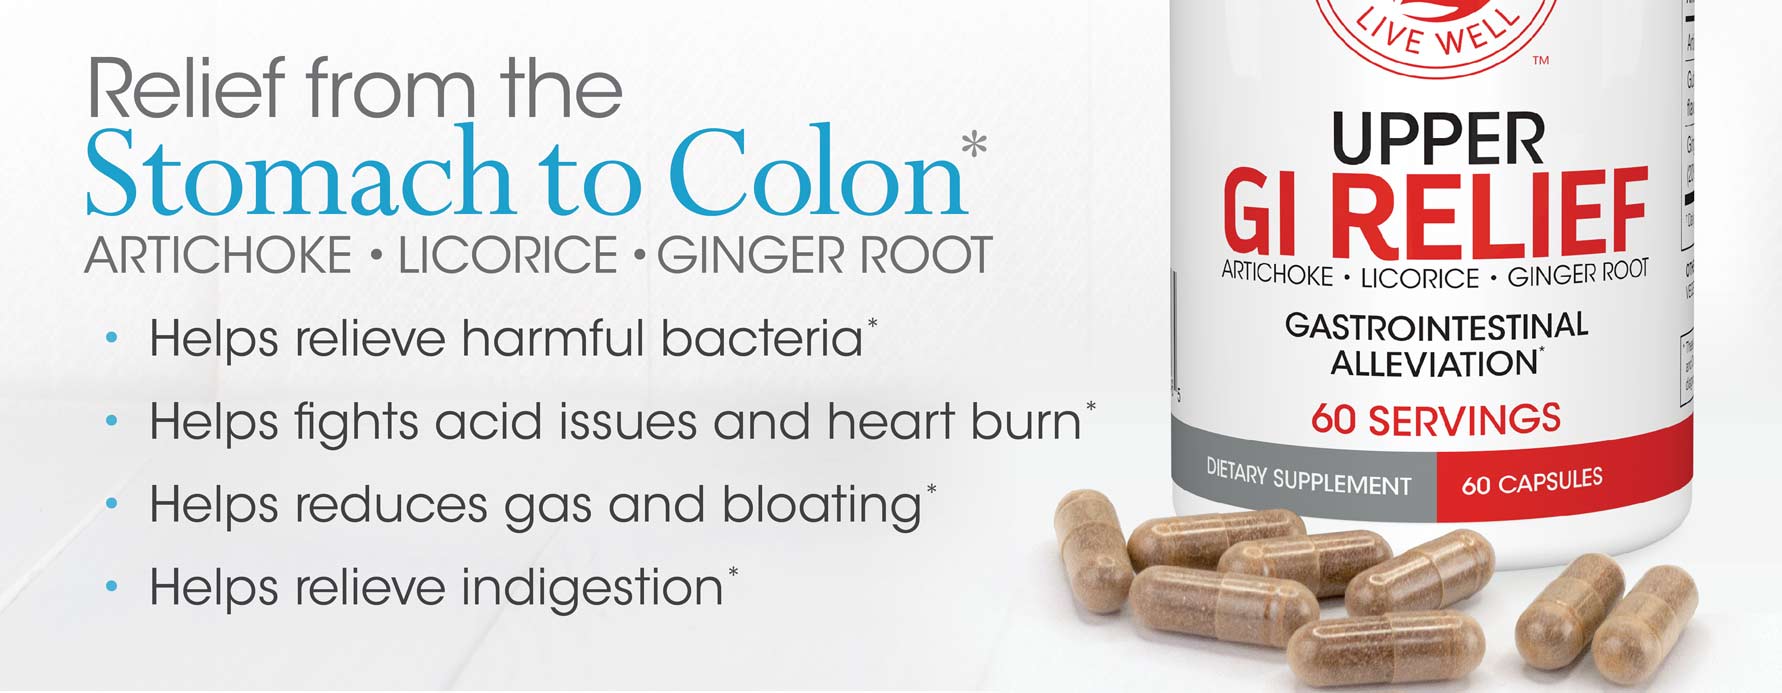 Relief from the Stomach to Colon